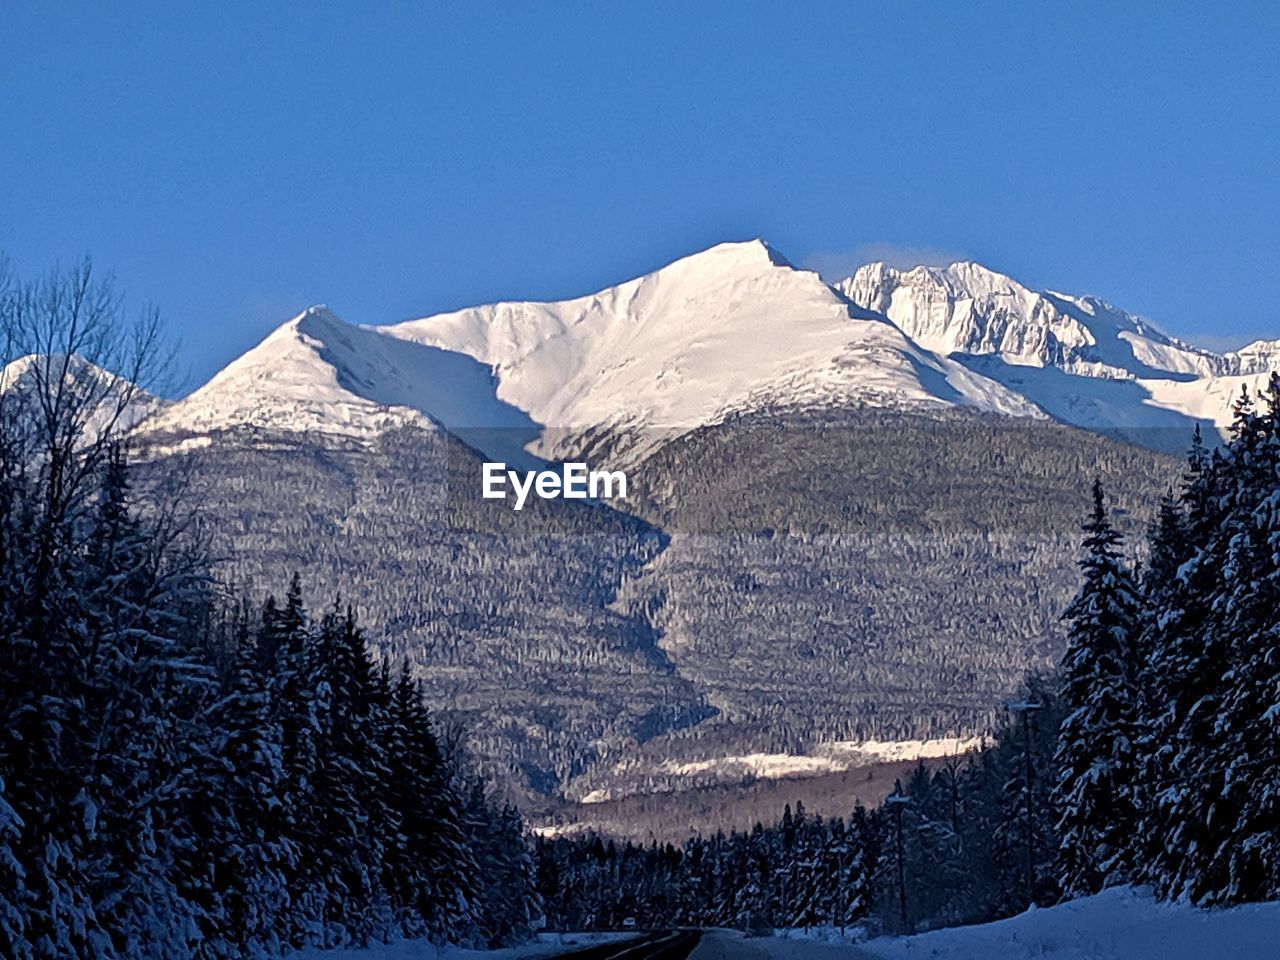 SNOW COVERED MOUNTAINS AGAINST CLEAR BLUE SKY